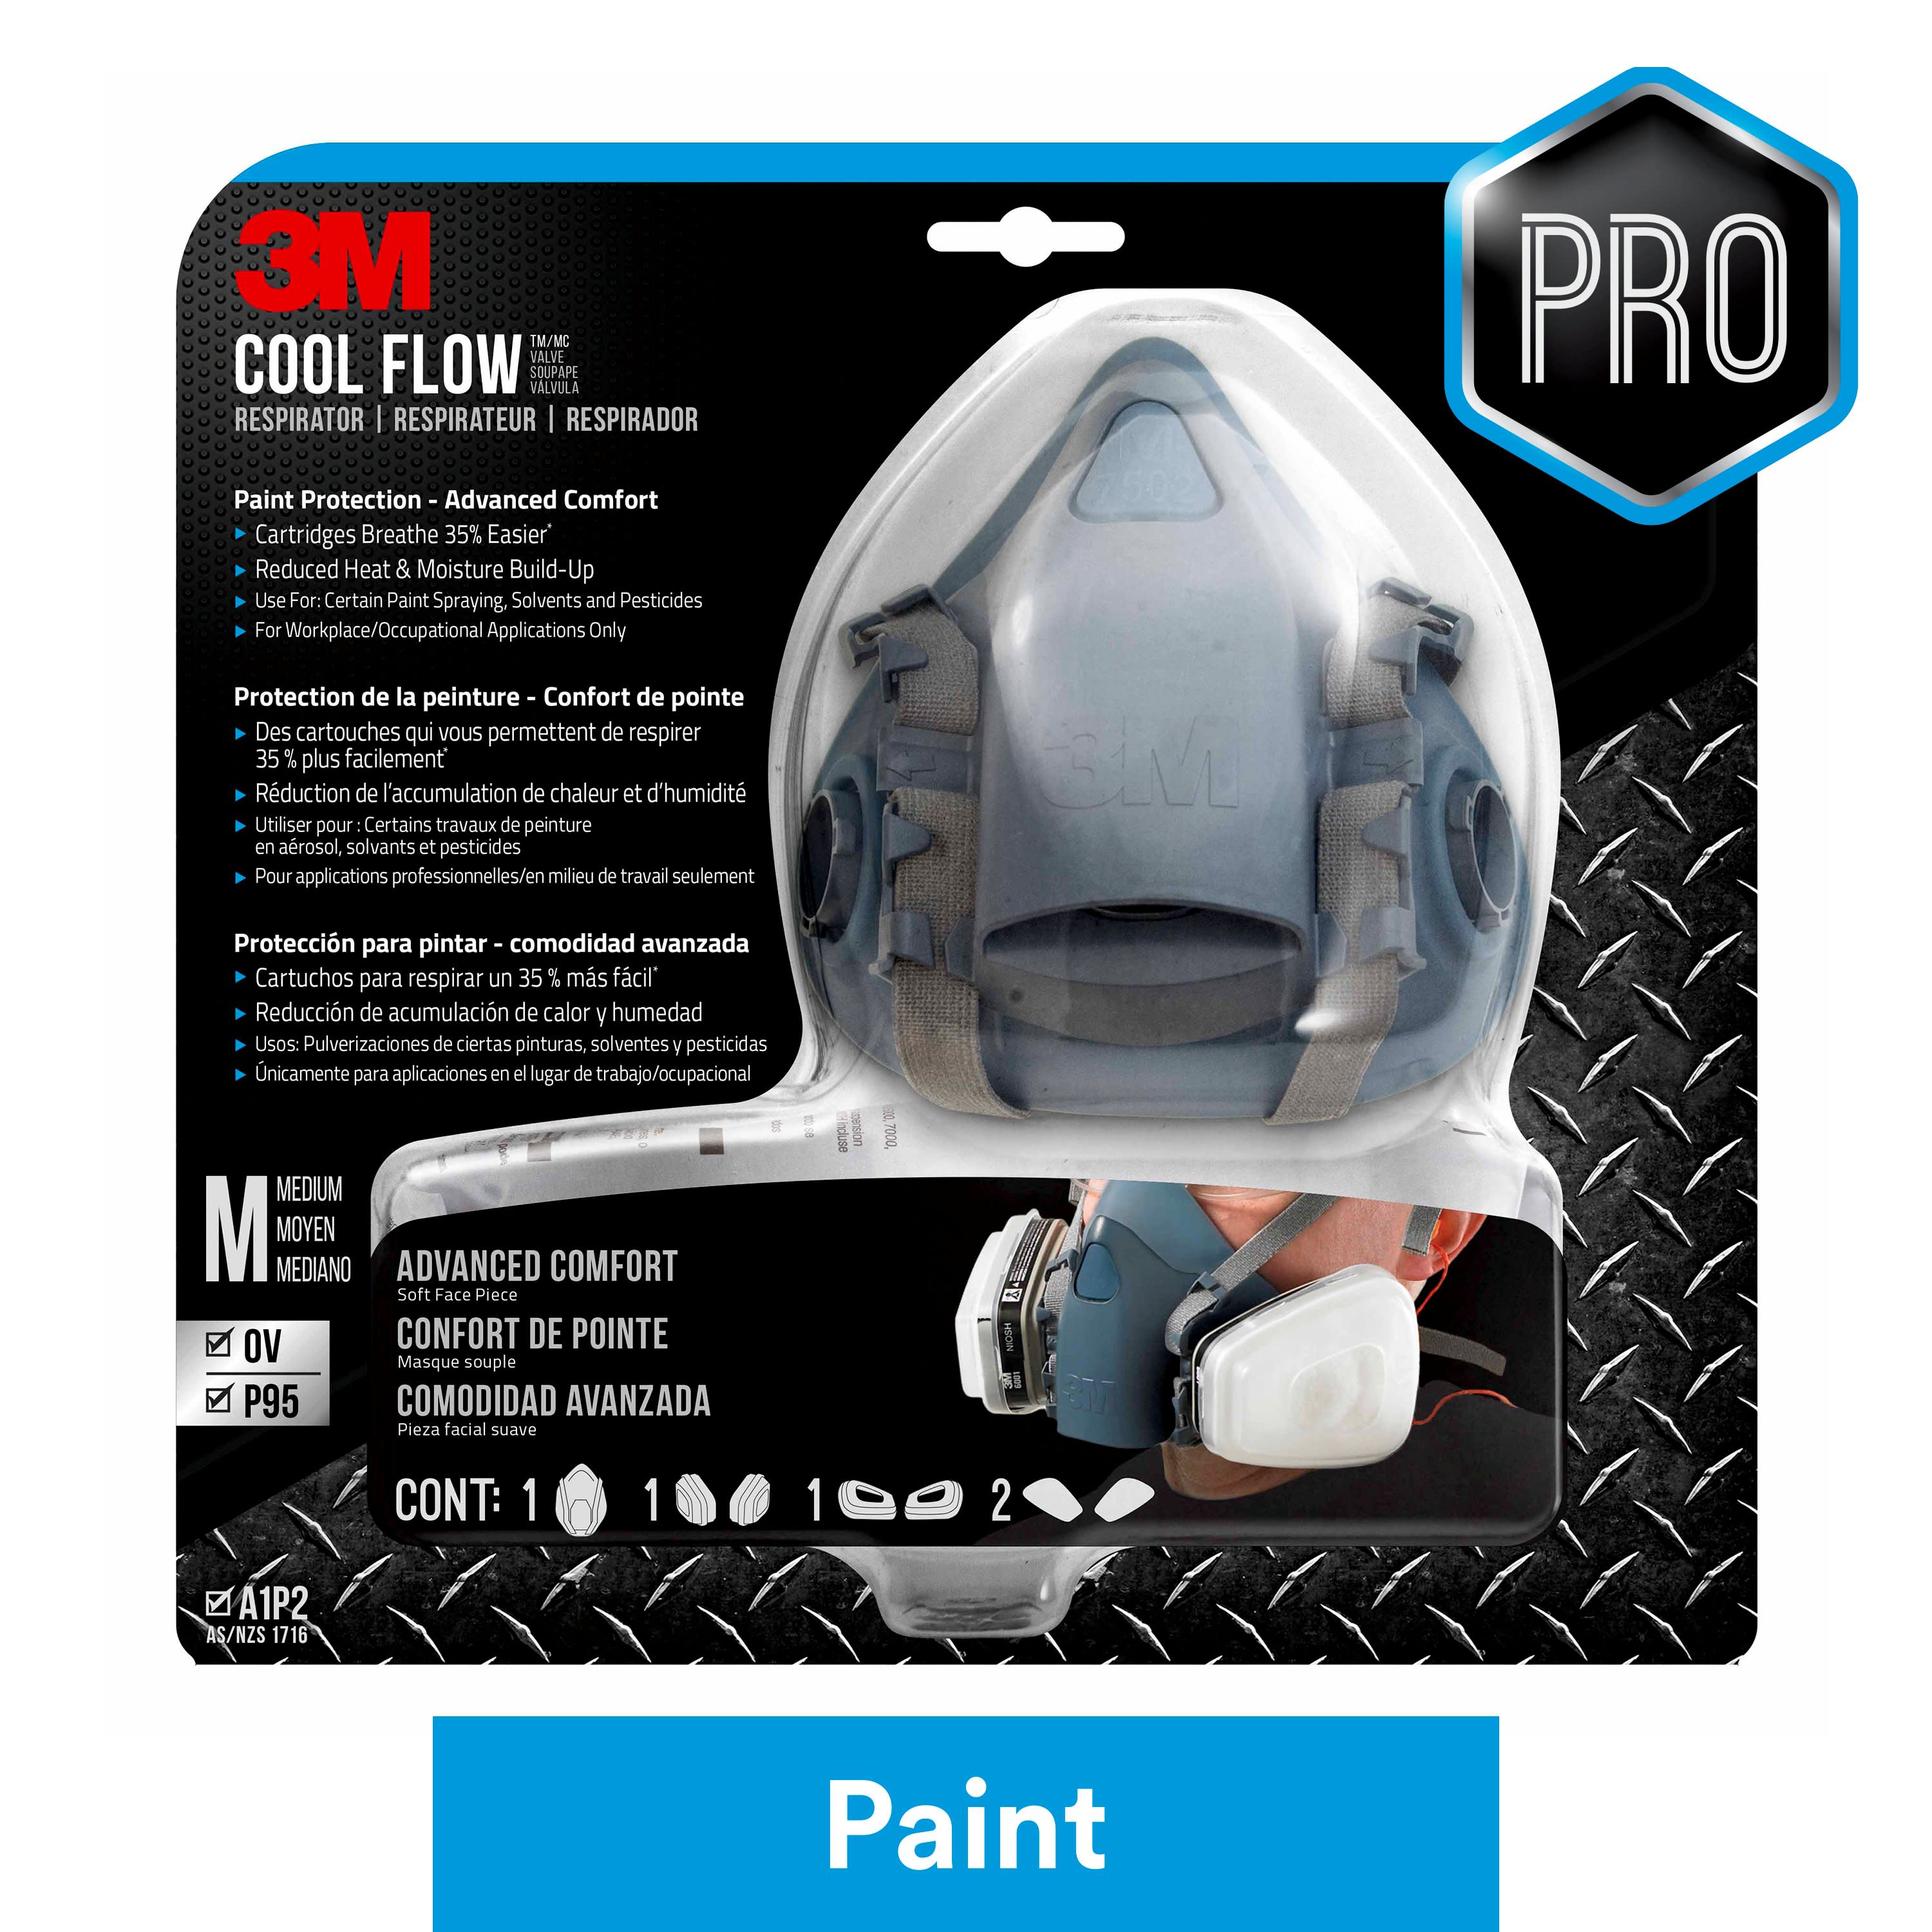 Reusable P95 Painting Valved Safety Mask Lowes.com